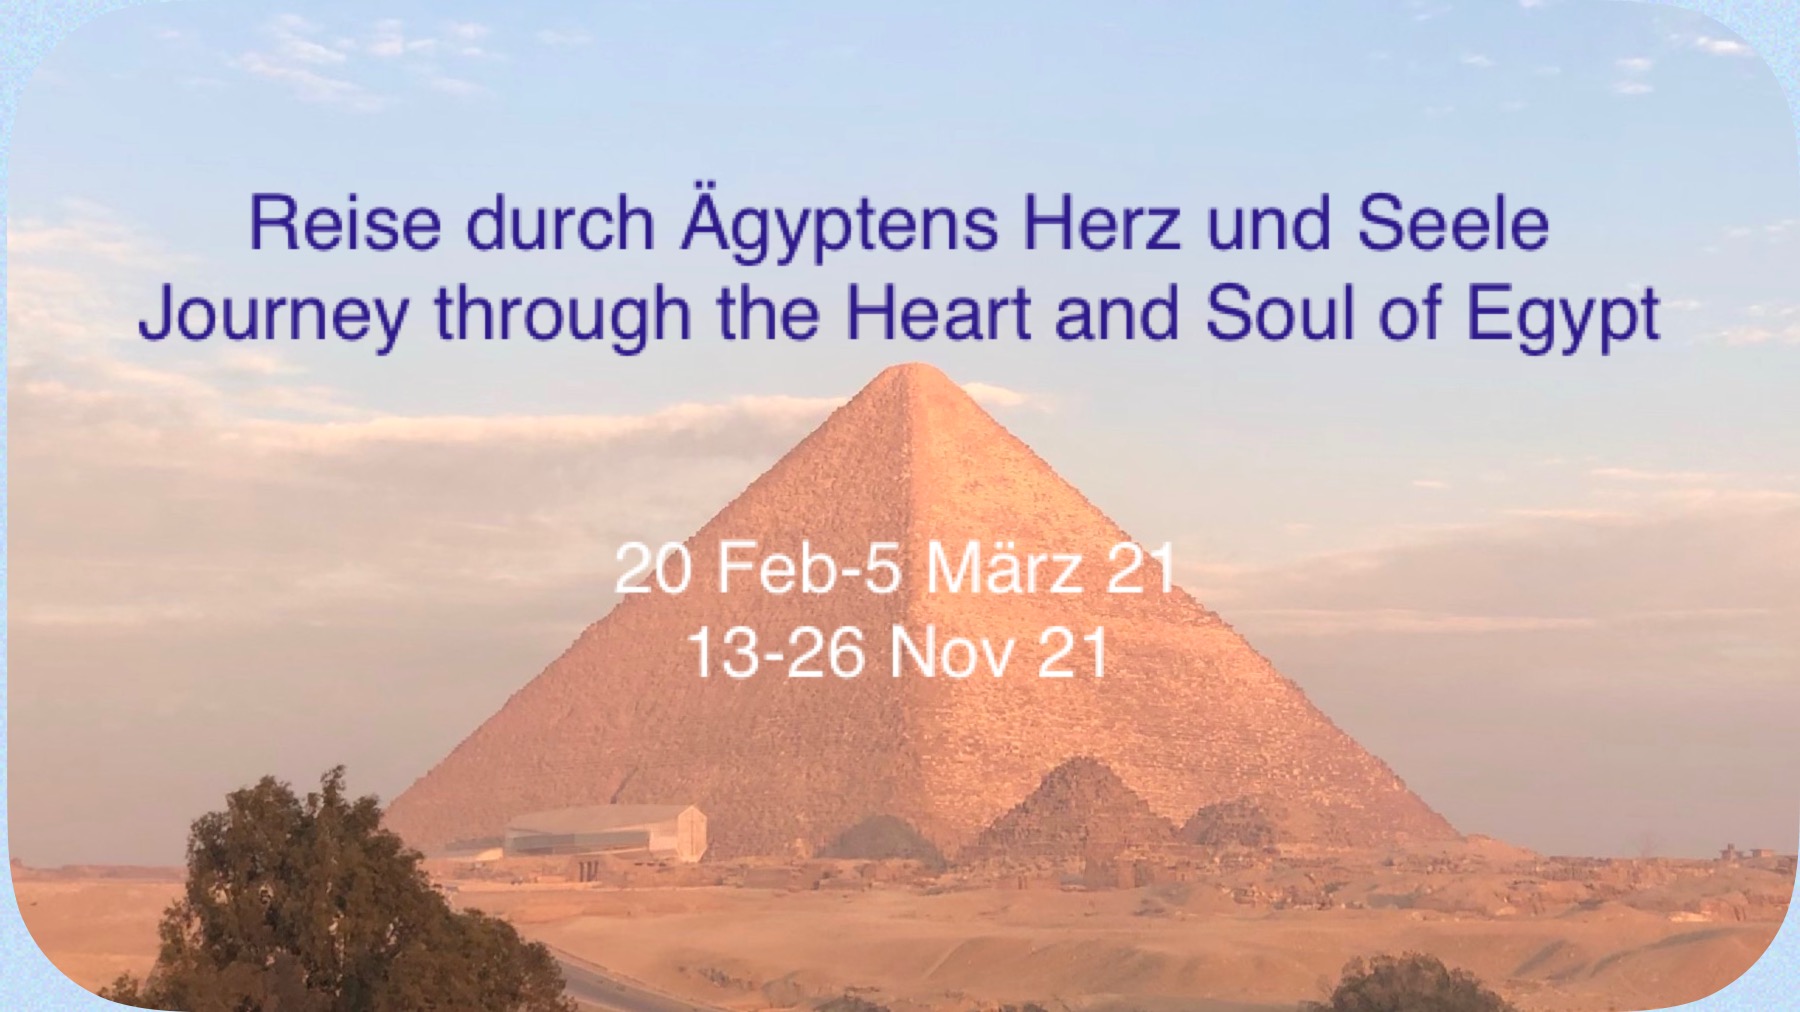 Journey through the Heart and Soul of Egypt